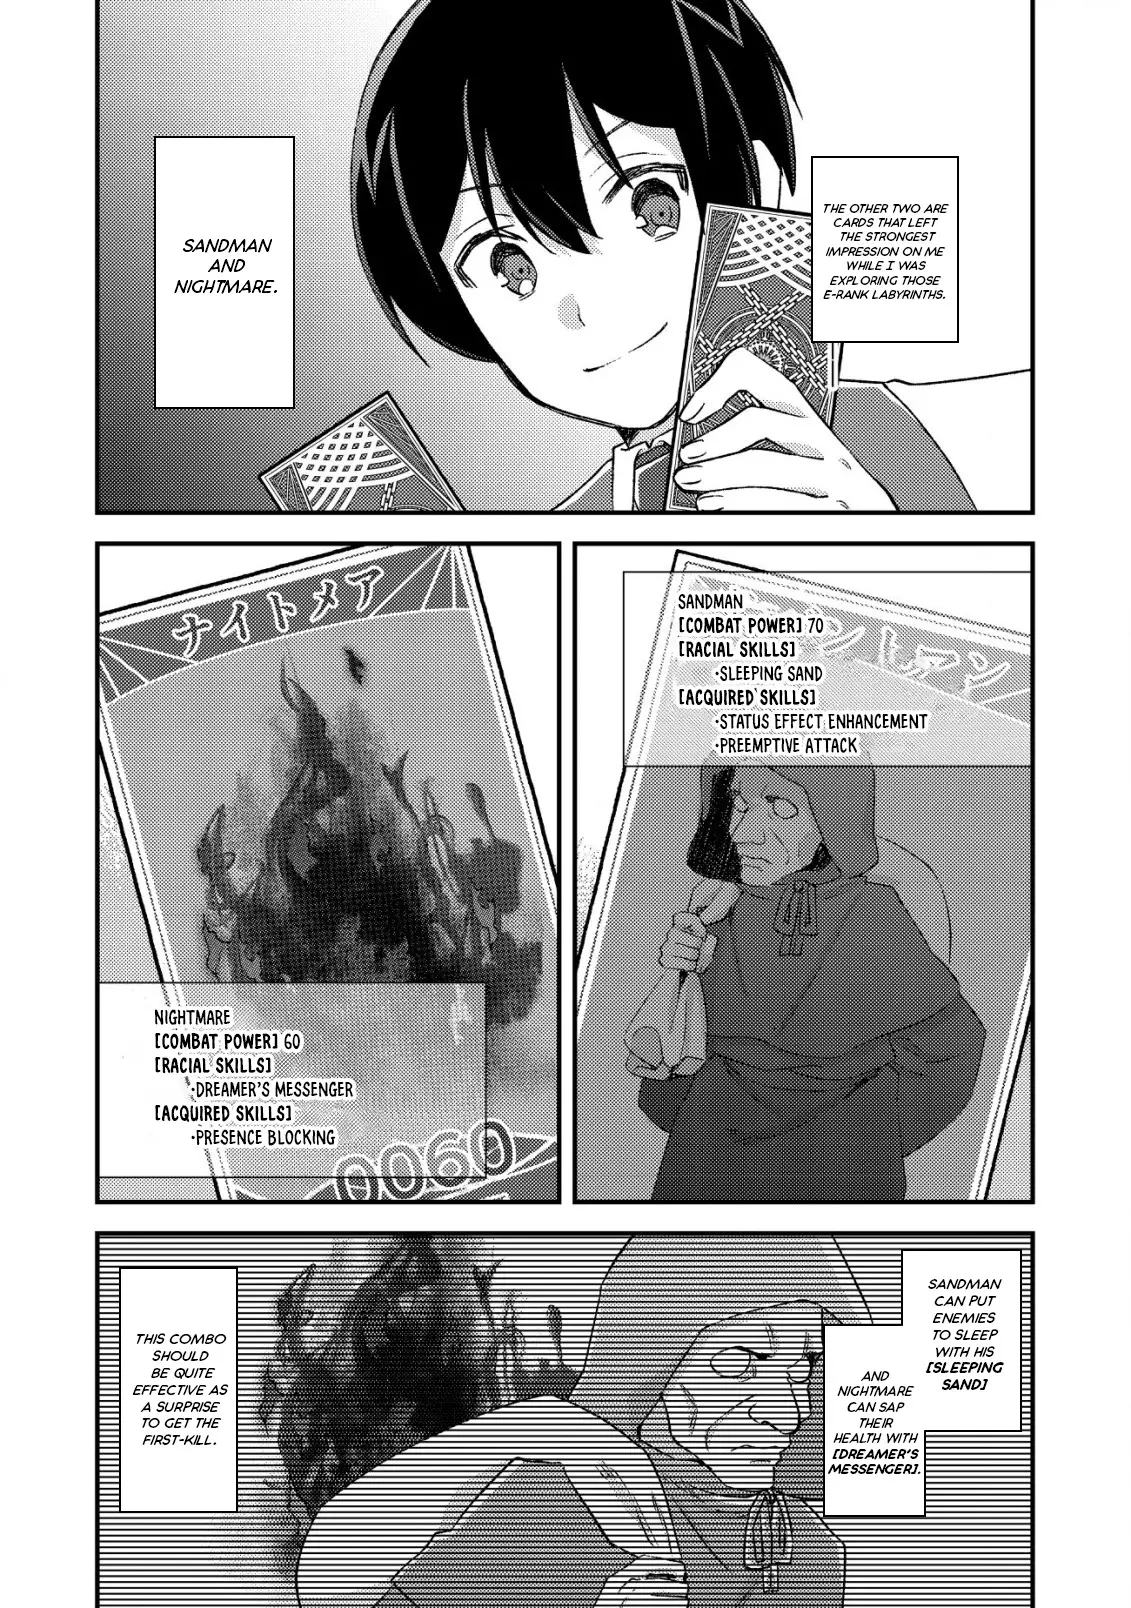 Can Even A Mob Highschooler Like Me Be A Normie If I Become An Adventurer? - 20 page 26-fb1cd259